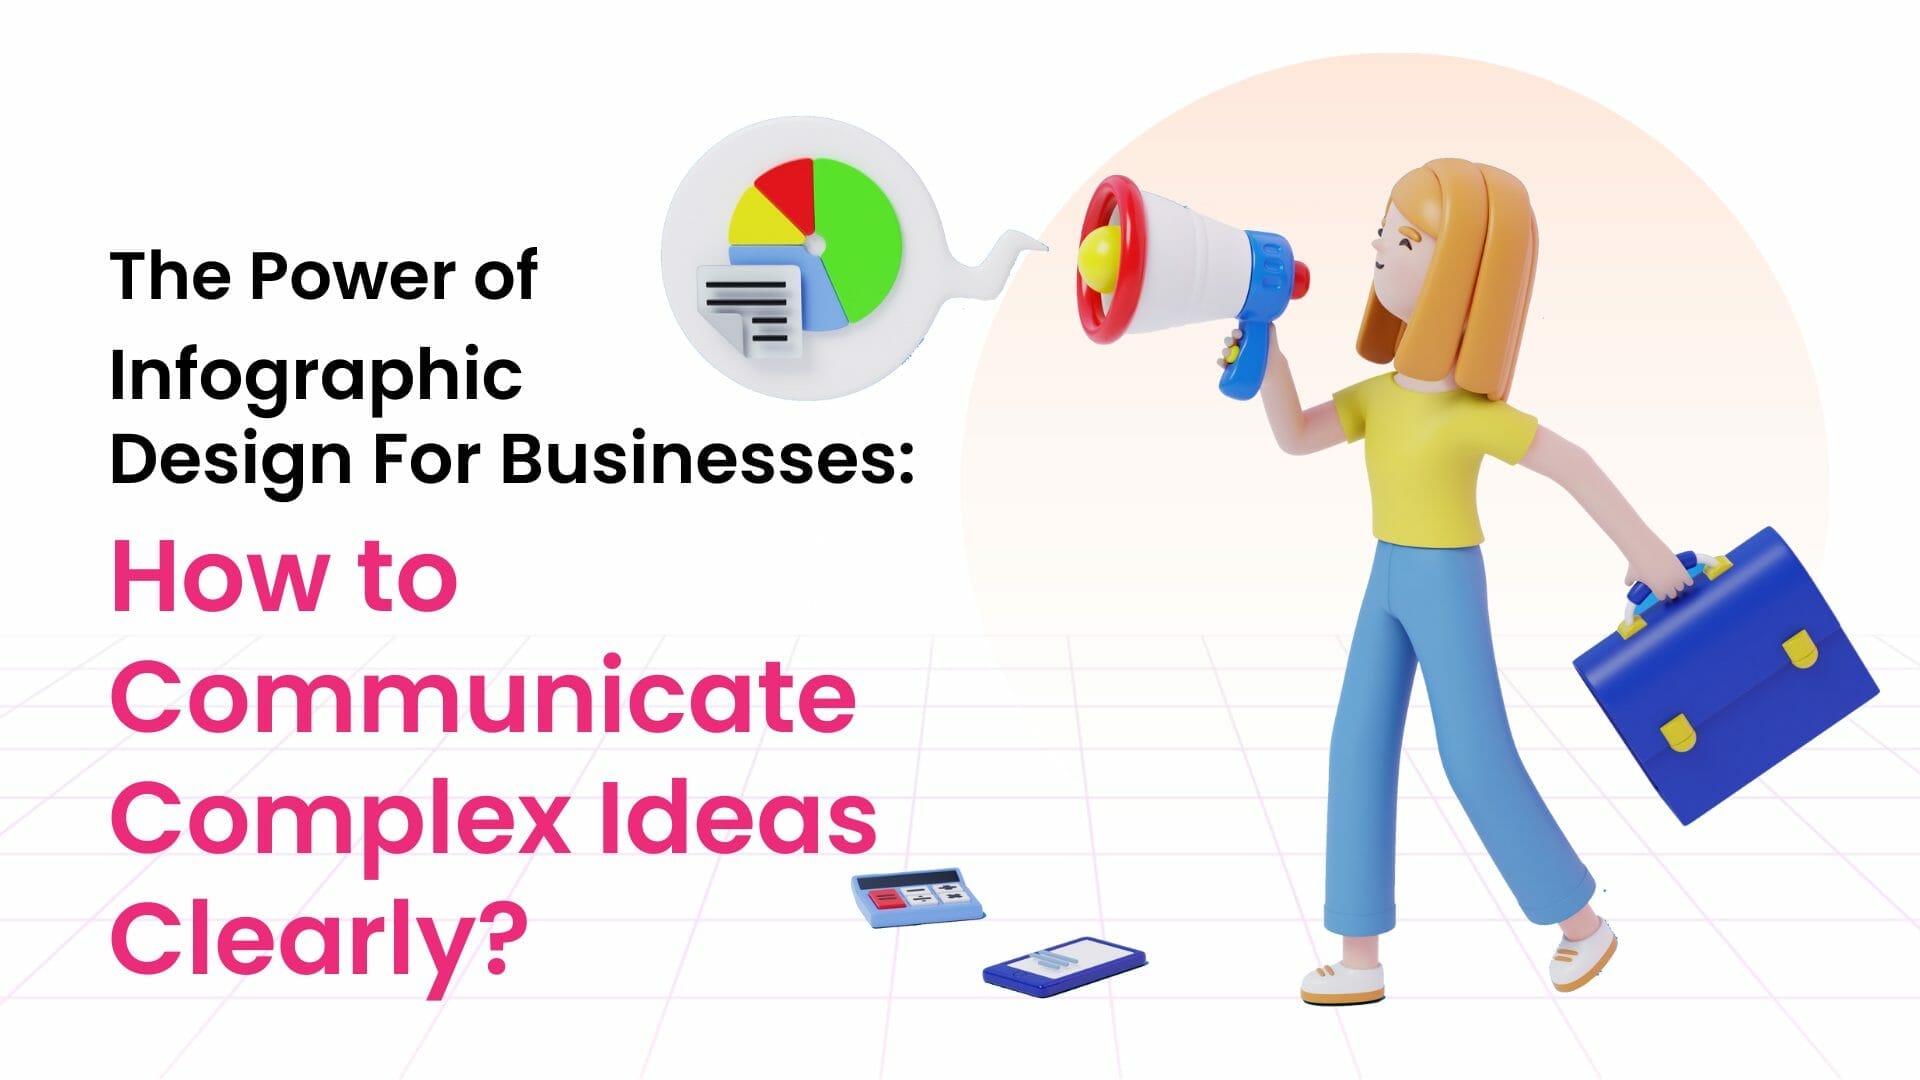 The Power of Infographic Design For Businesses: How to Communicate Complex Ideas Clearly?